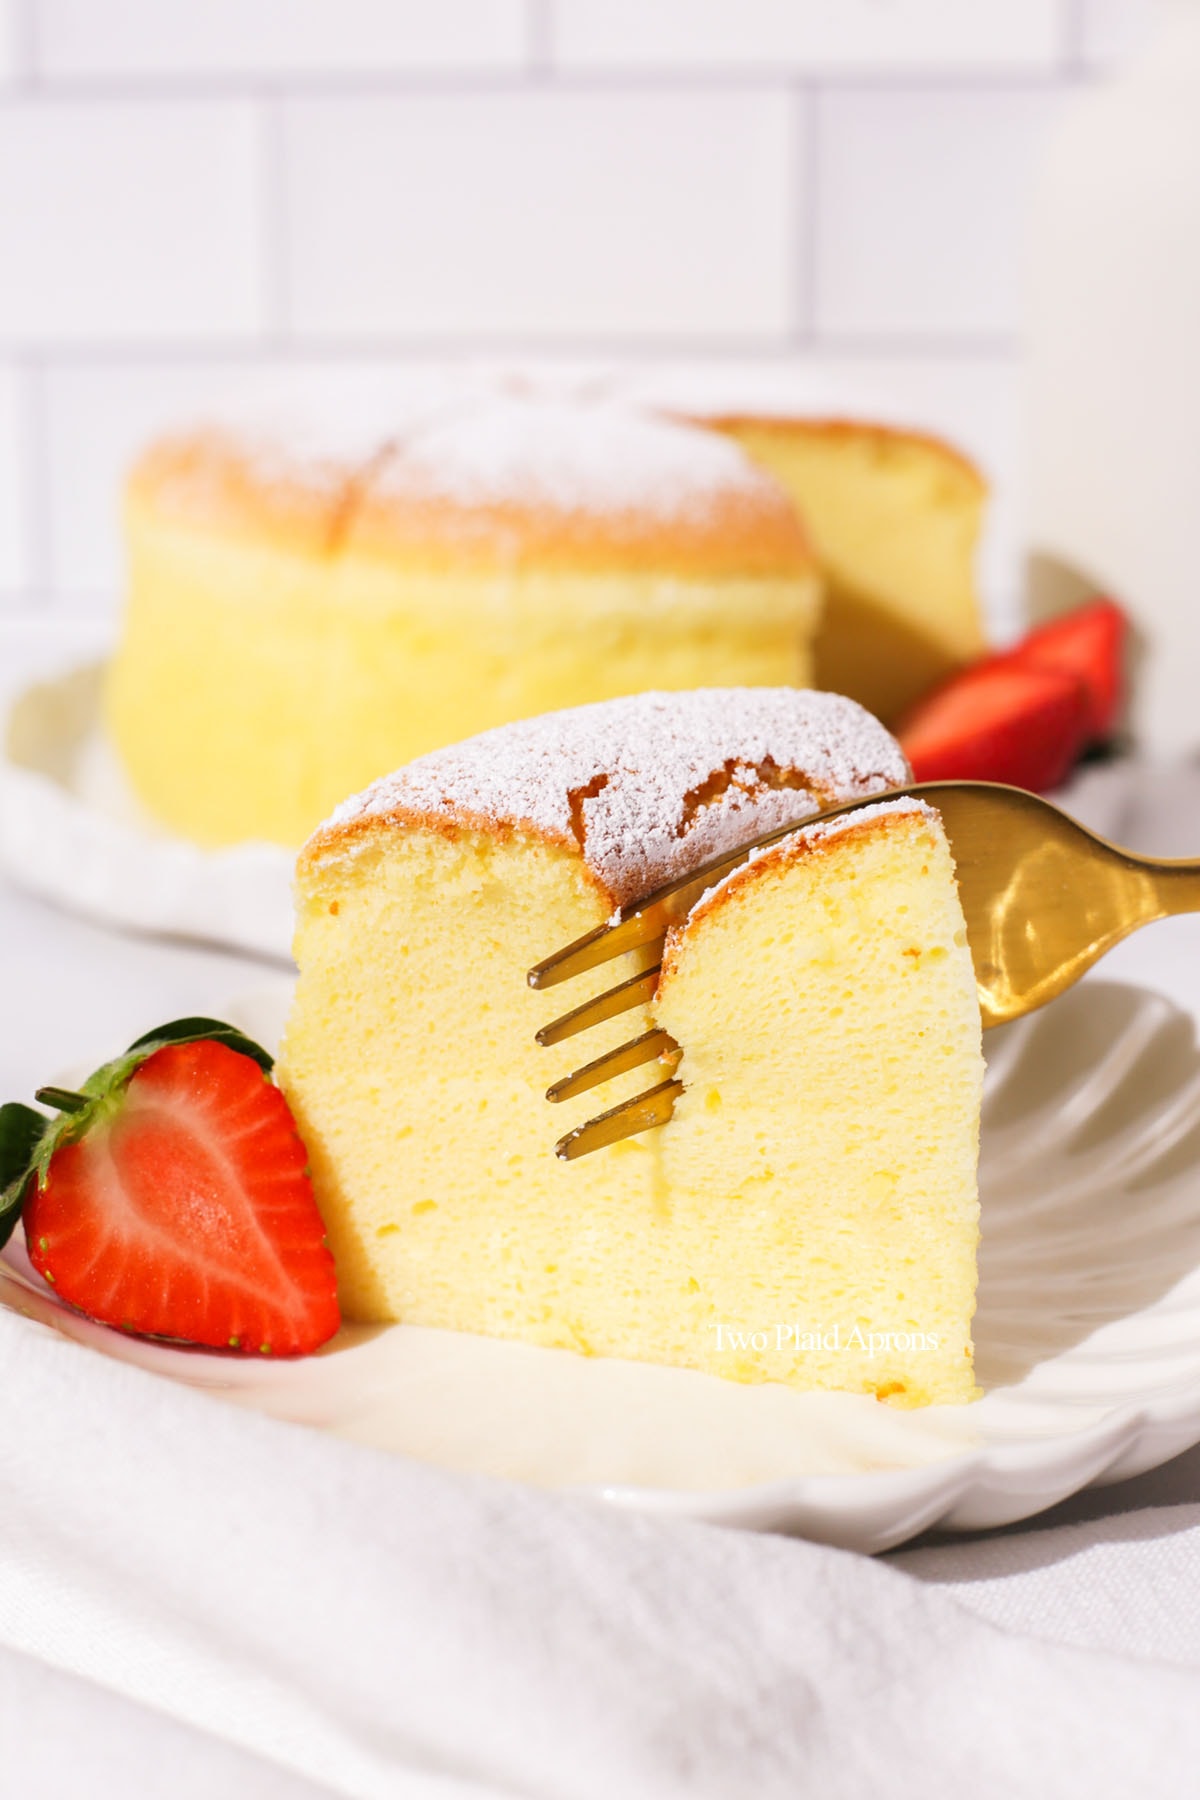 Easy Rice-Cooker Fluffy Cheese Cake Recipe by Tasty